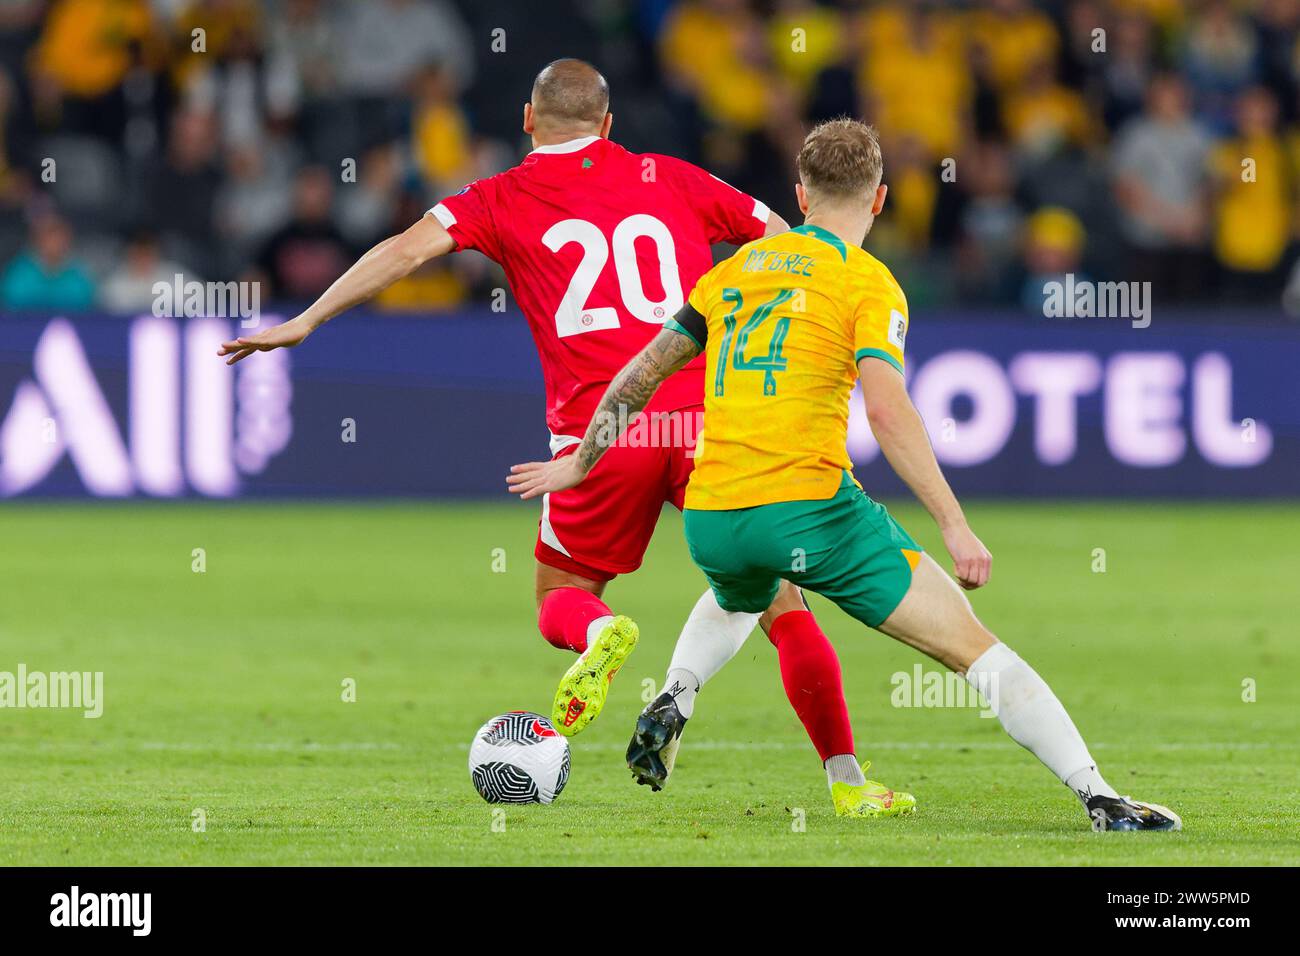 Sydney, Australia. 21st Mar, 2024. Ali Tneich controls the ball during the FIFA World Cup 2026 Qualifier match between Australia and Lebanon at Western Sydney Stadium on March 21, 2024 in Sydney, Australia Credit: IOIO IMAGES/Alamy Live News Stock Photo